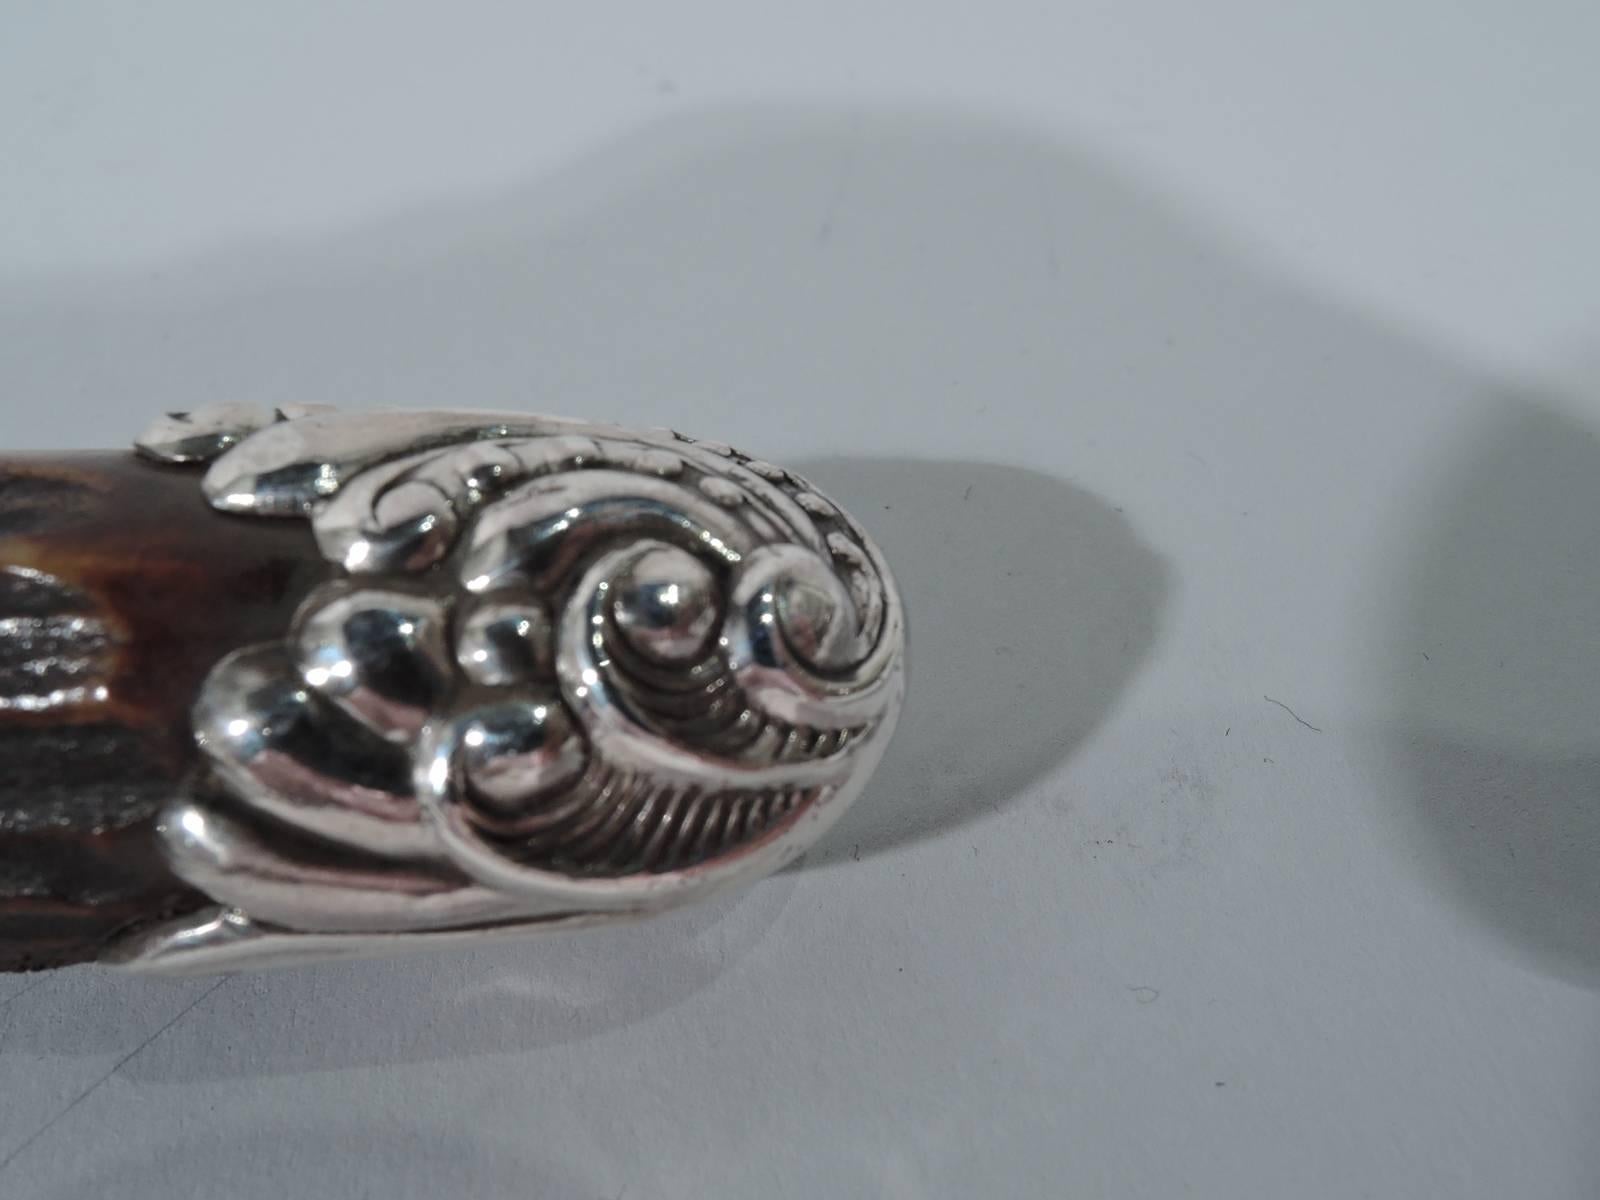 American Art Nouveau sterling silver and horn corkscrew. Horn handle has sterling silver mounts with swirling scrolls, beading, and foliage. Easy grip size and texture. Hallmarked “Sterling”.